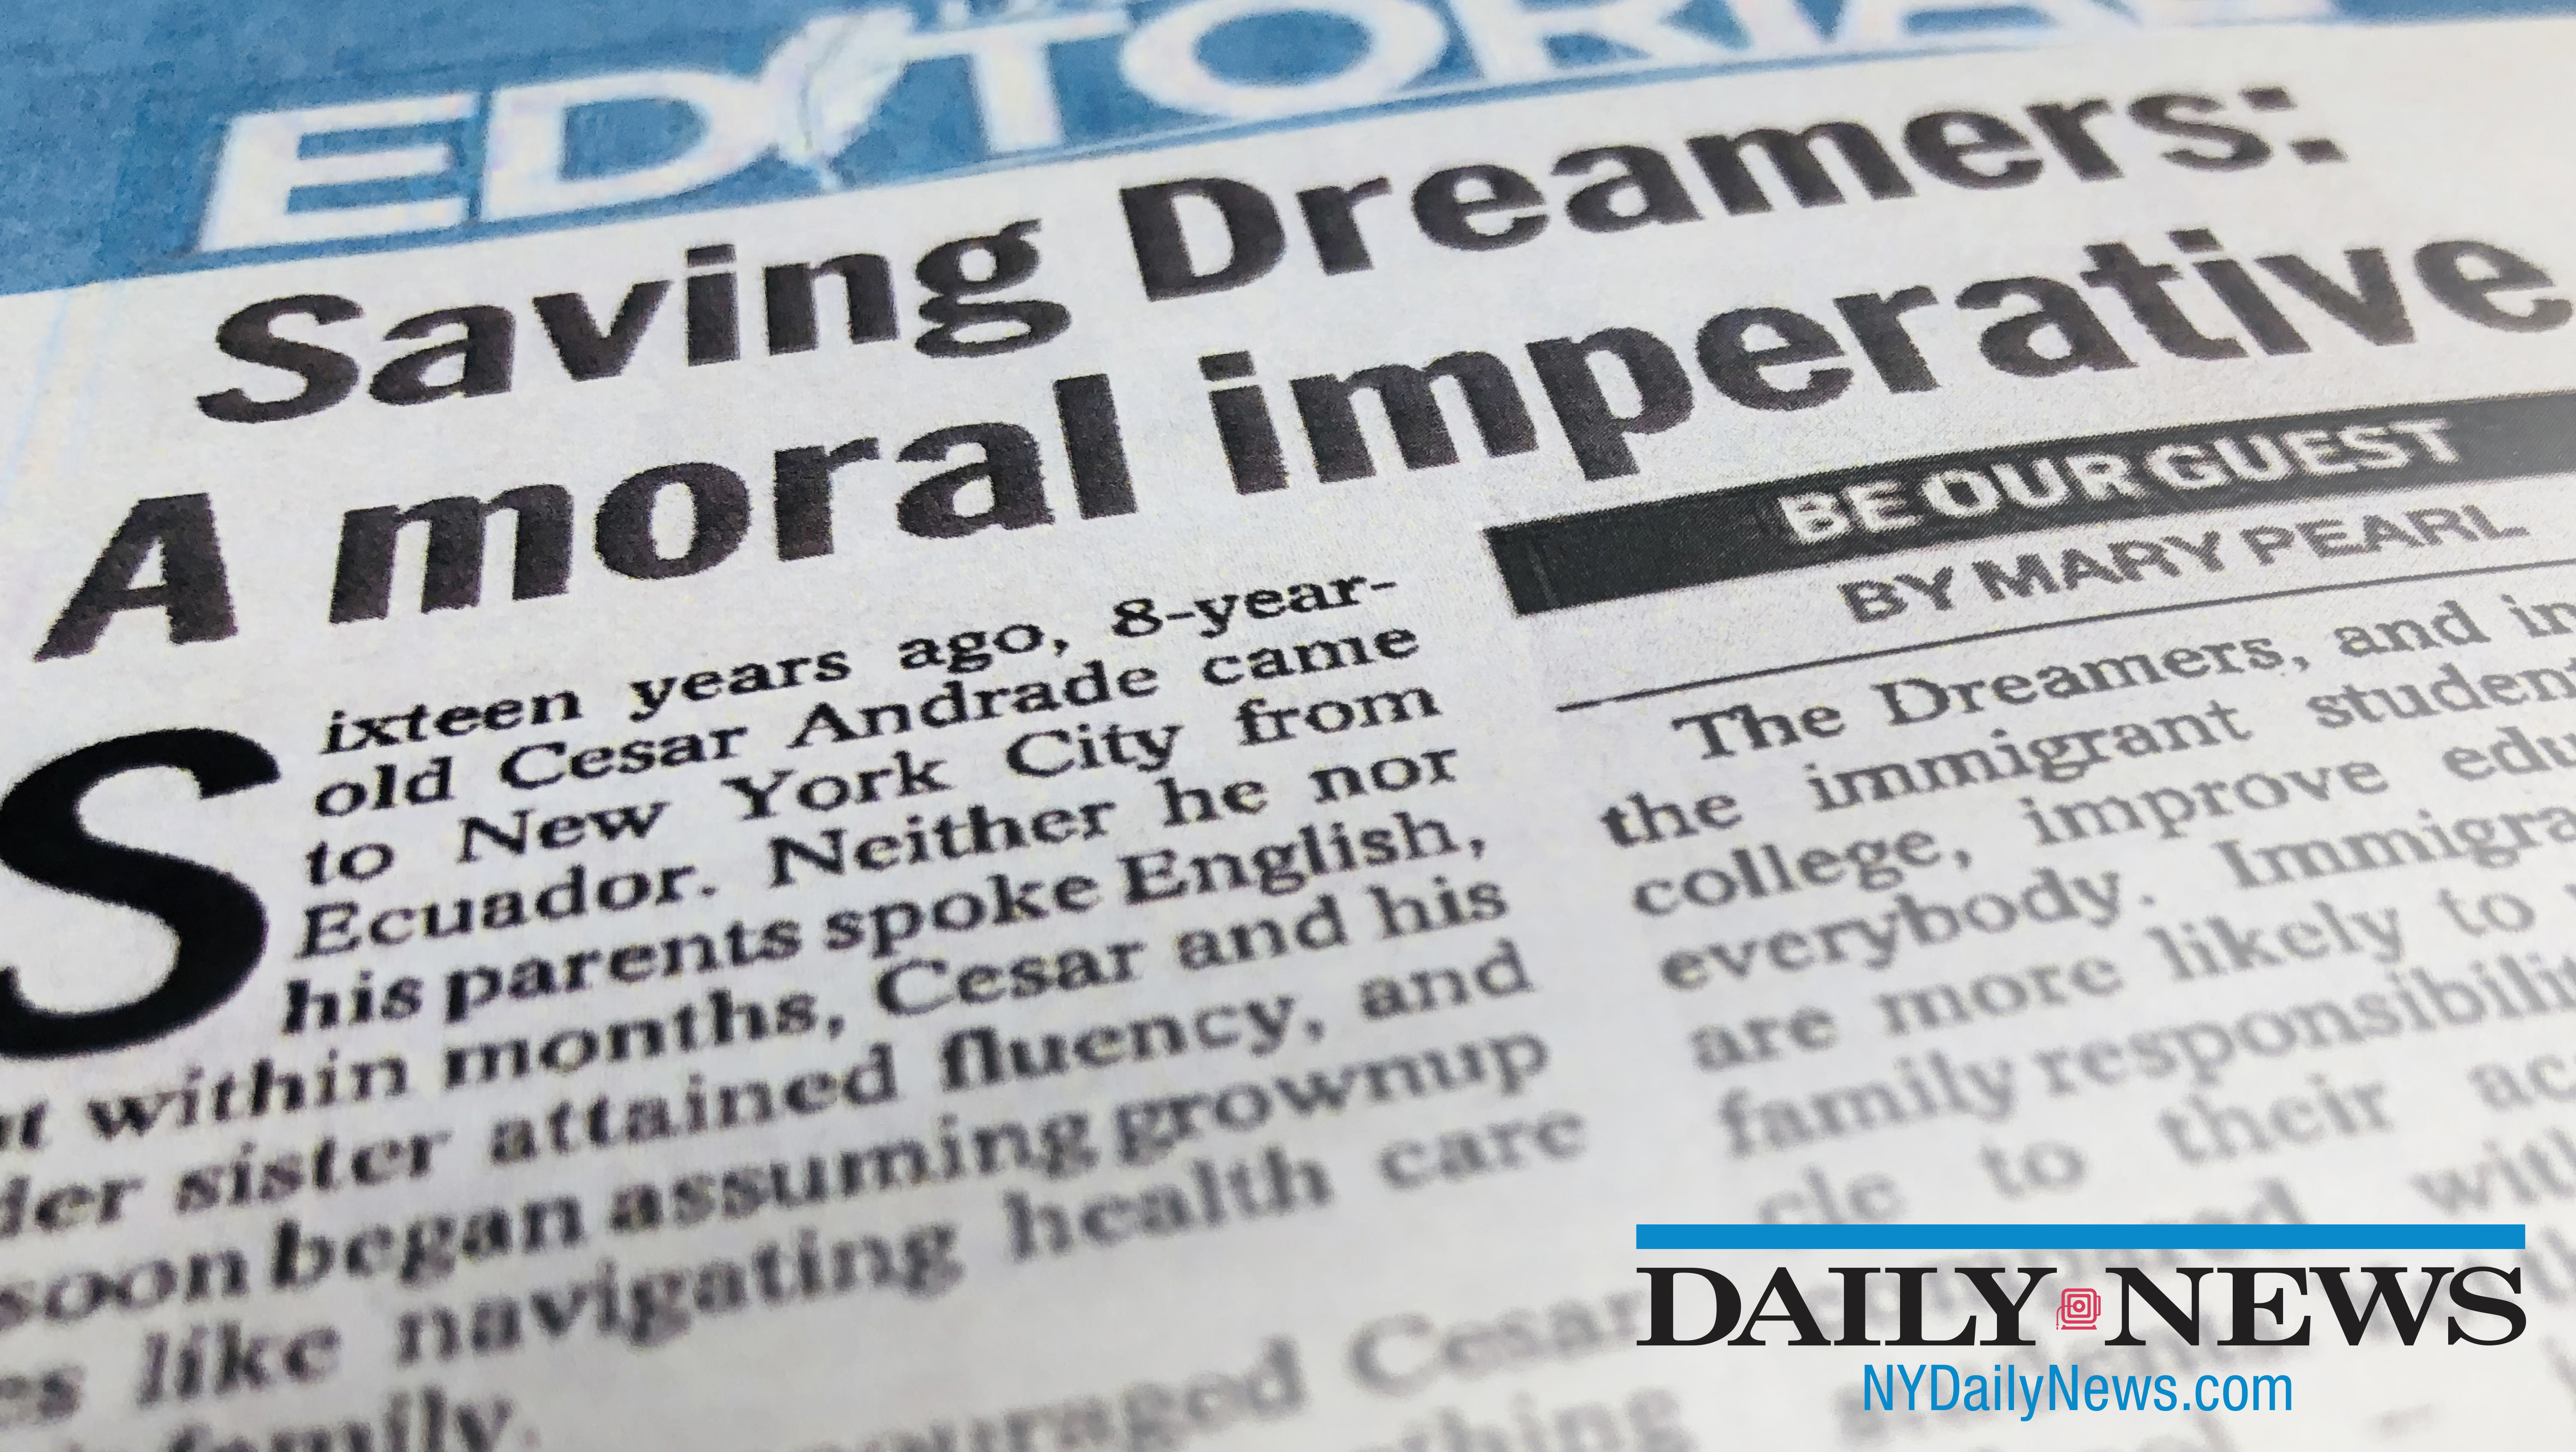 Saving Dreamers: A moral imperative